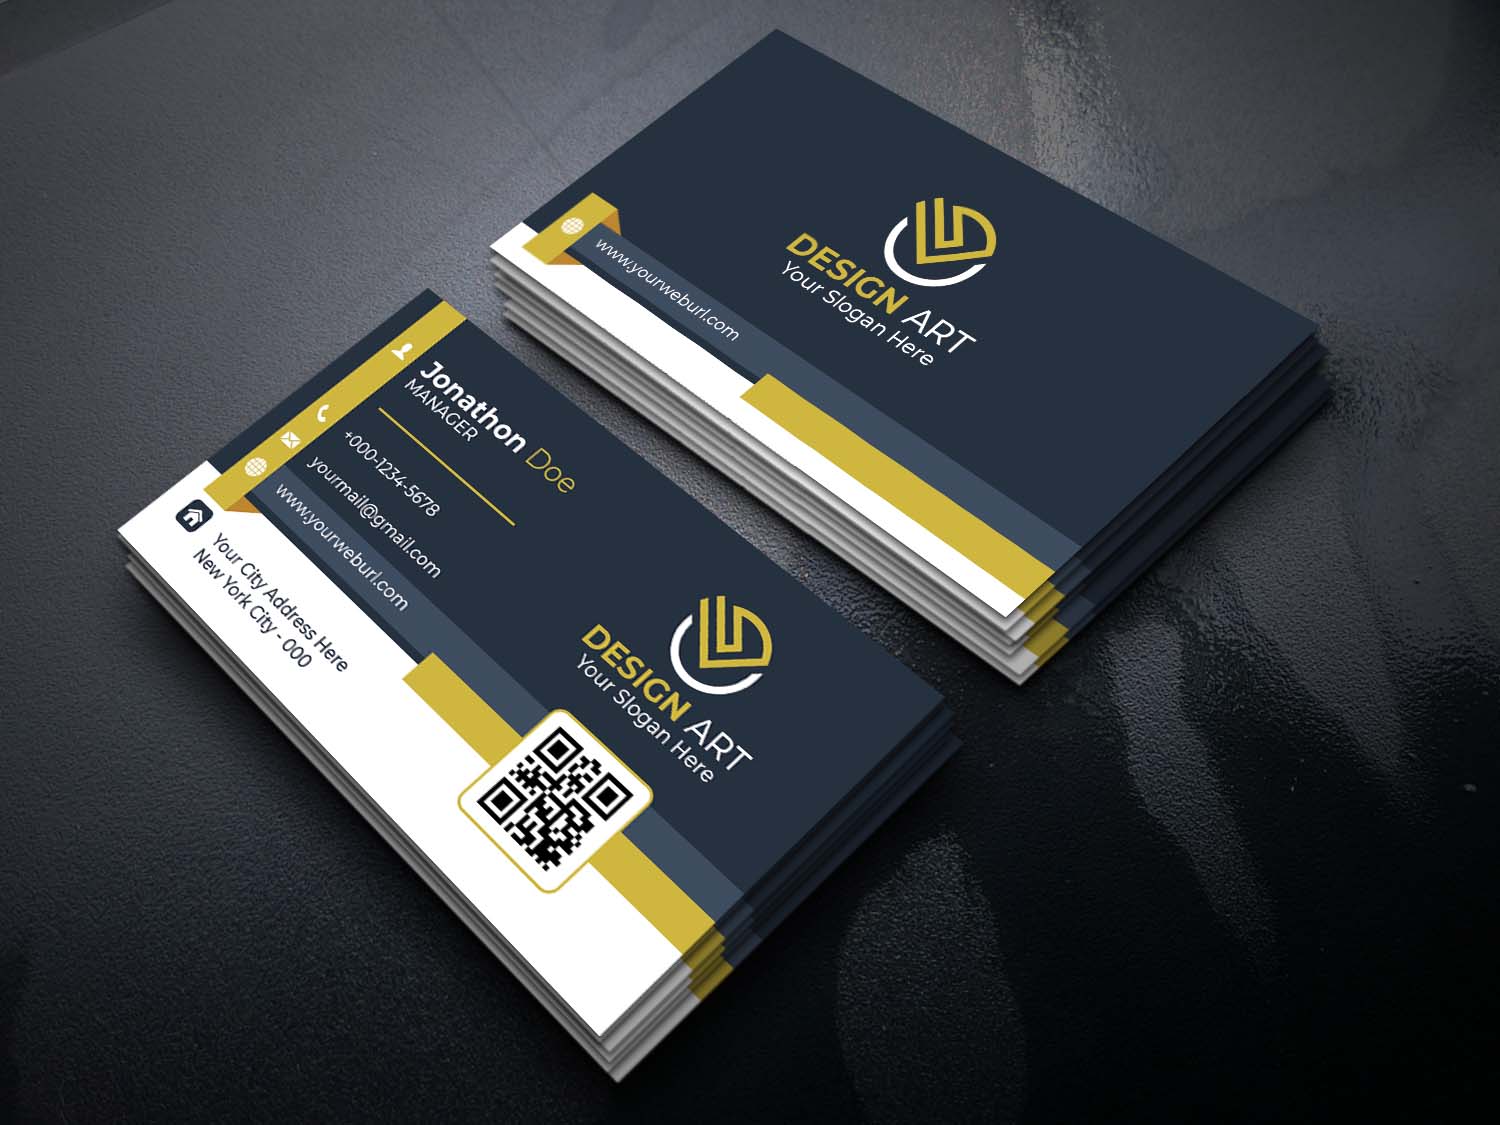 Two business cards on a black surface.